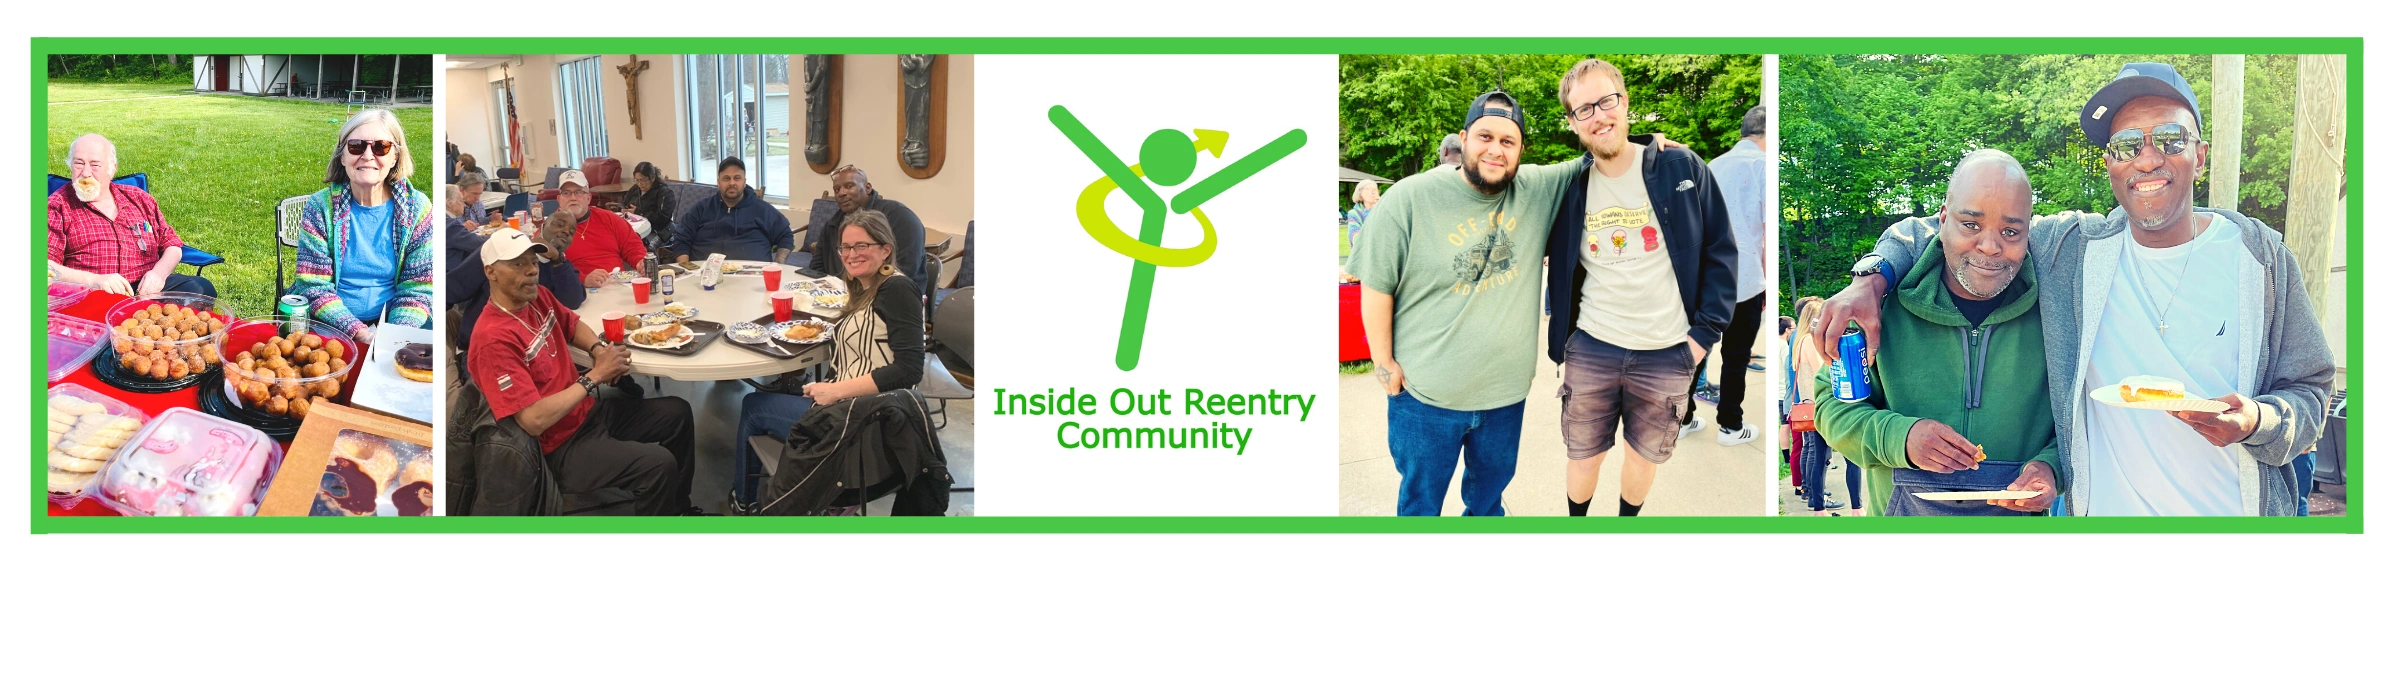 Inside Out Reentry Community